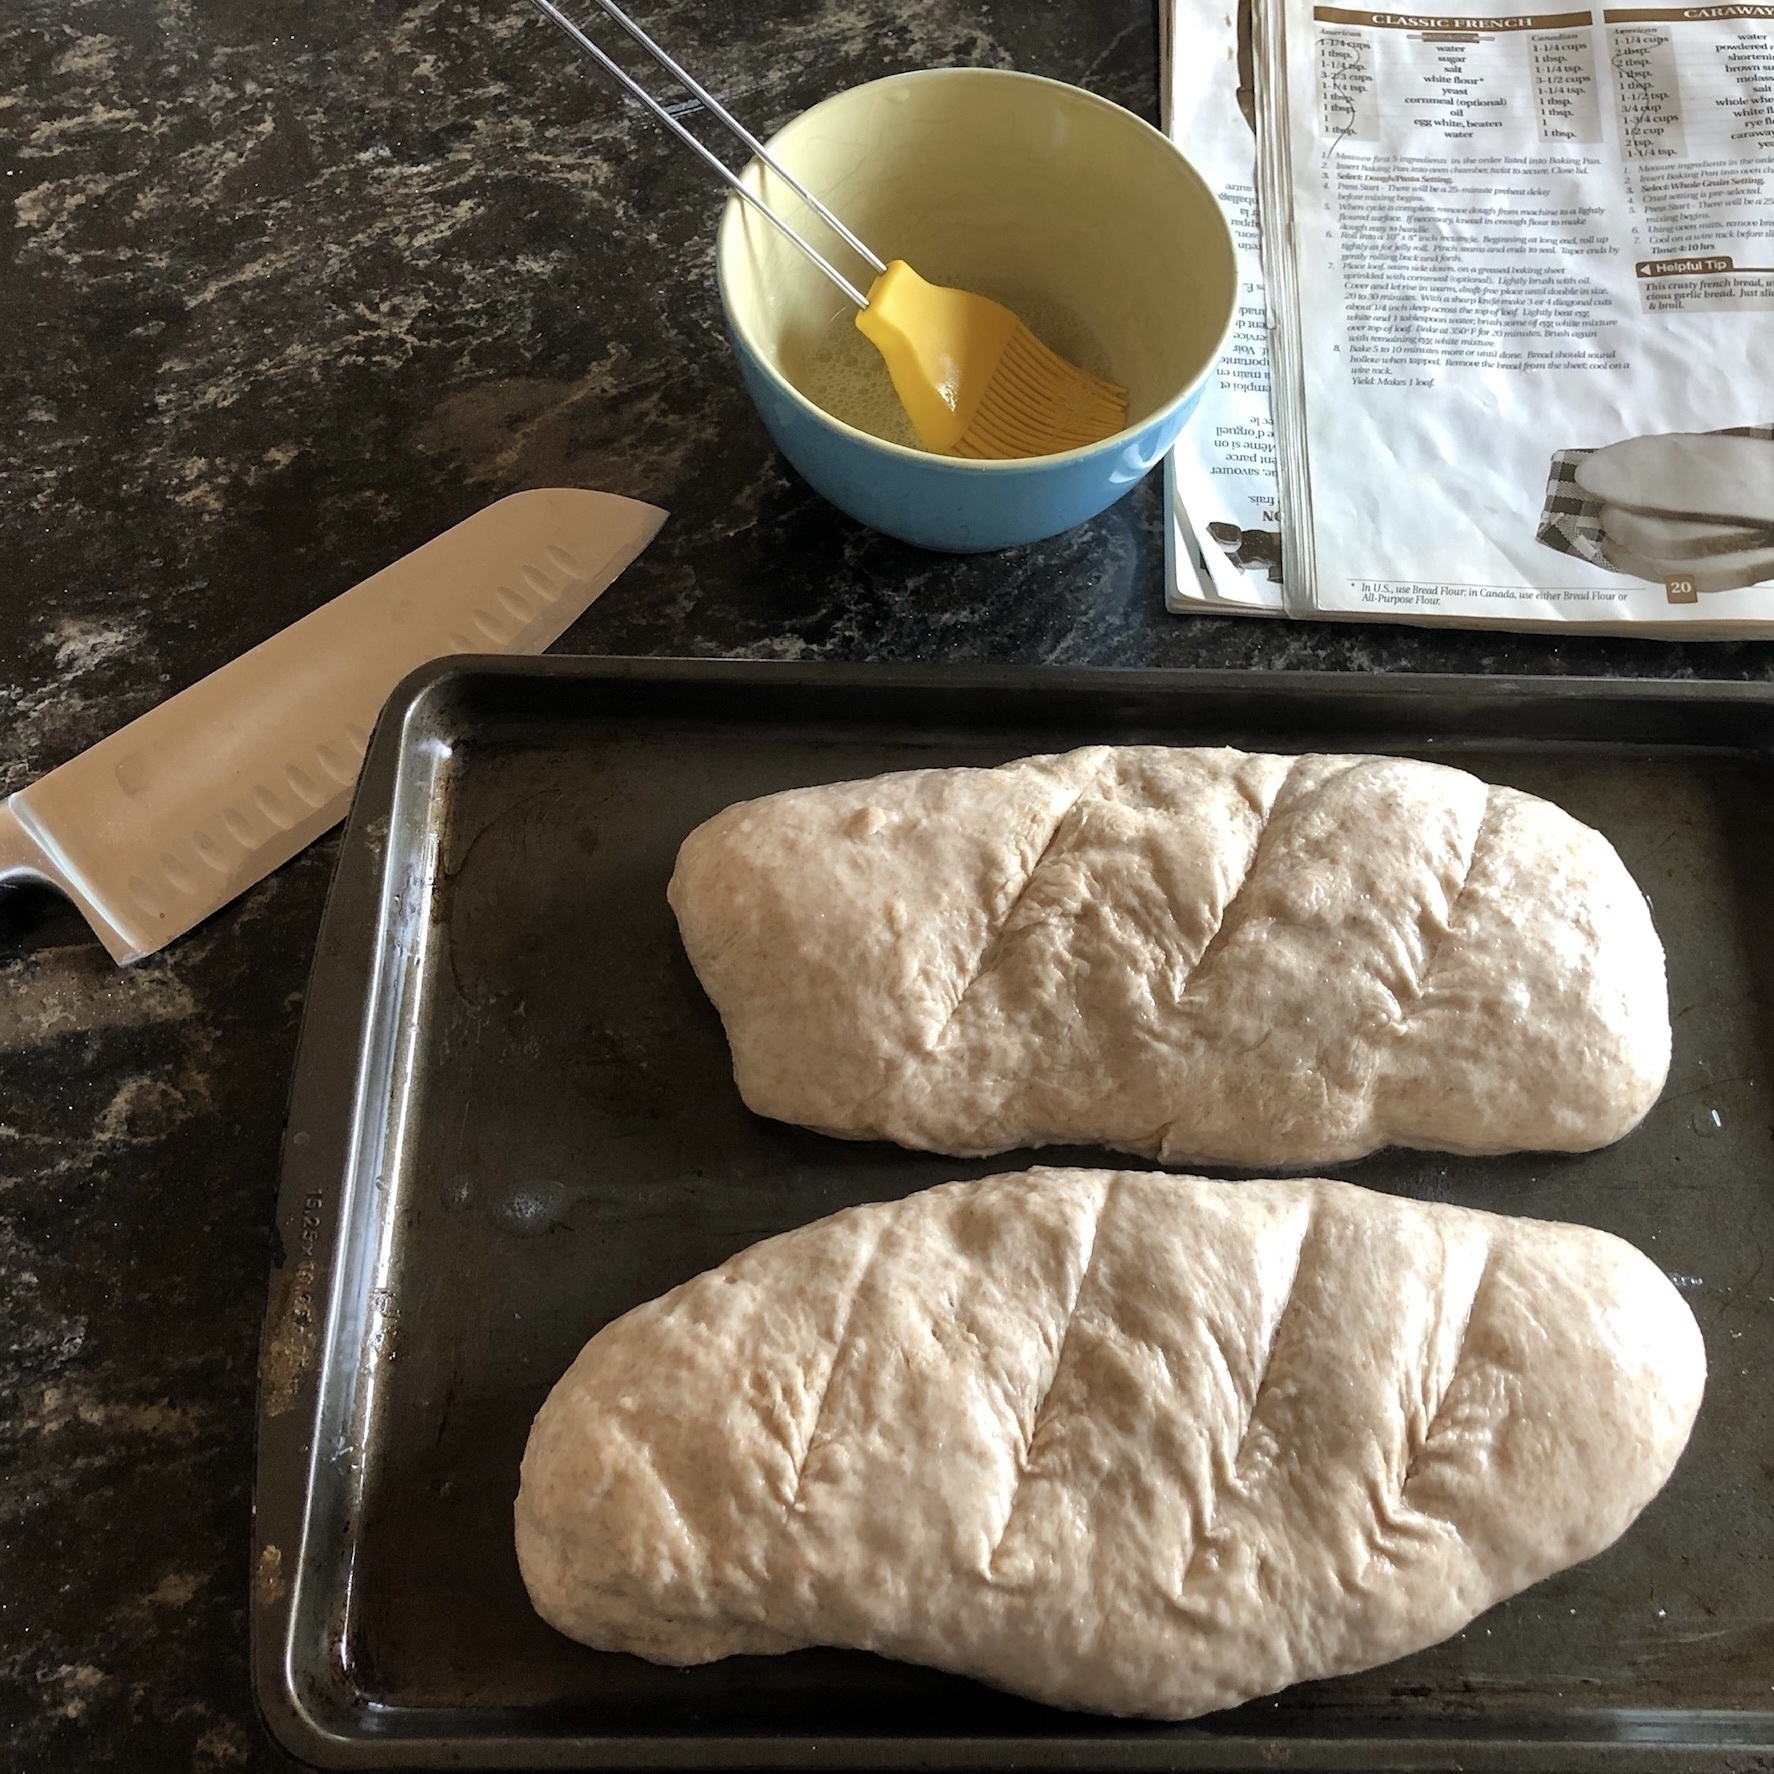 Two dough rolls, scored diagonally on top with a blue dish of egg wash and yellow brush beside them